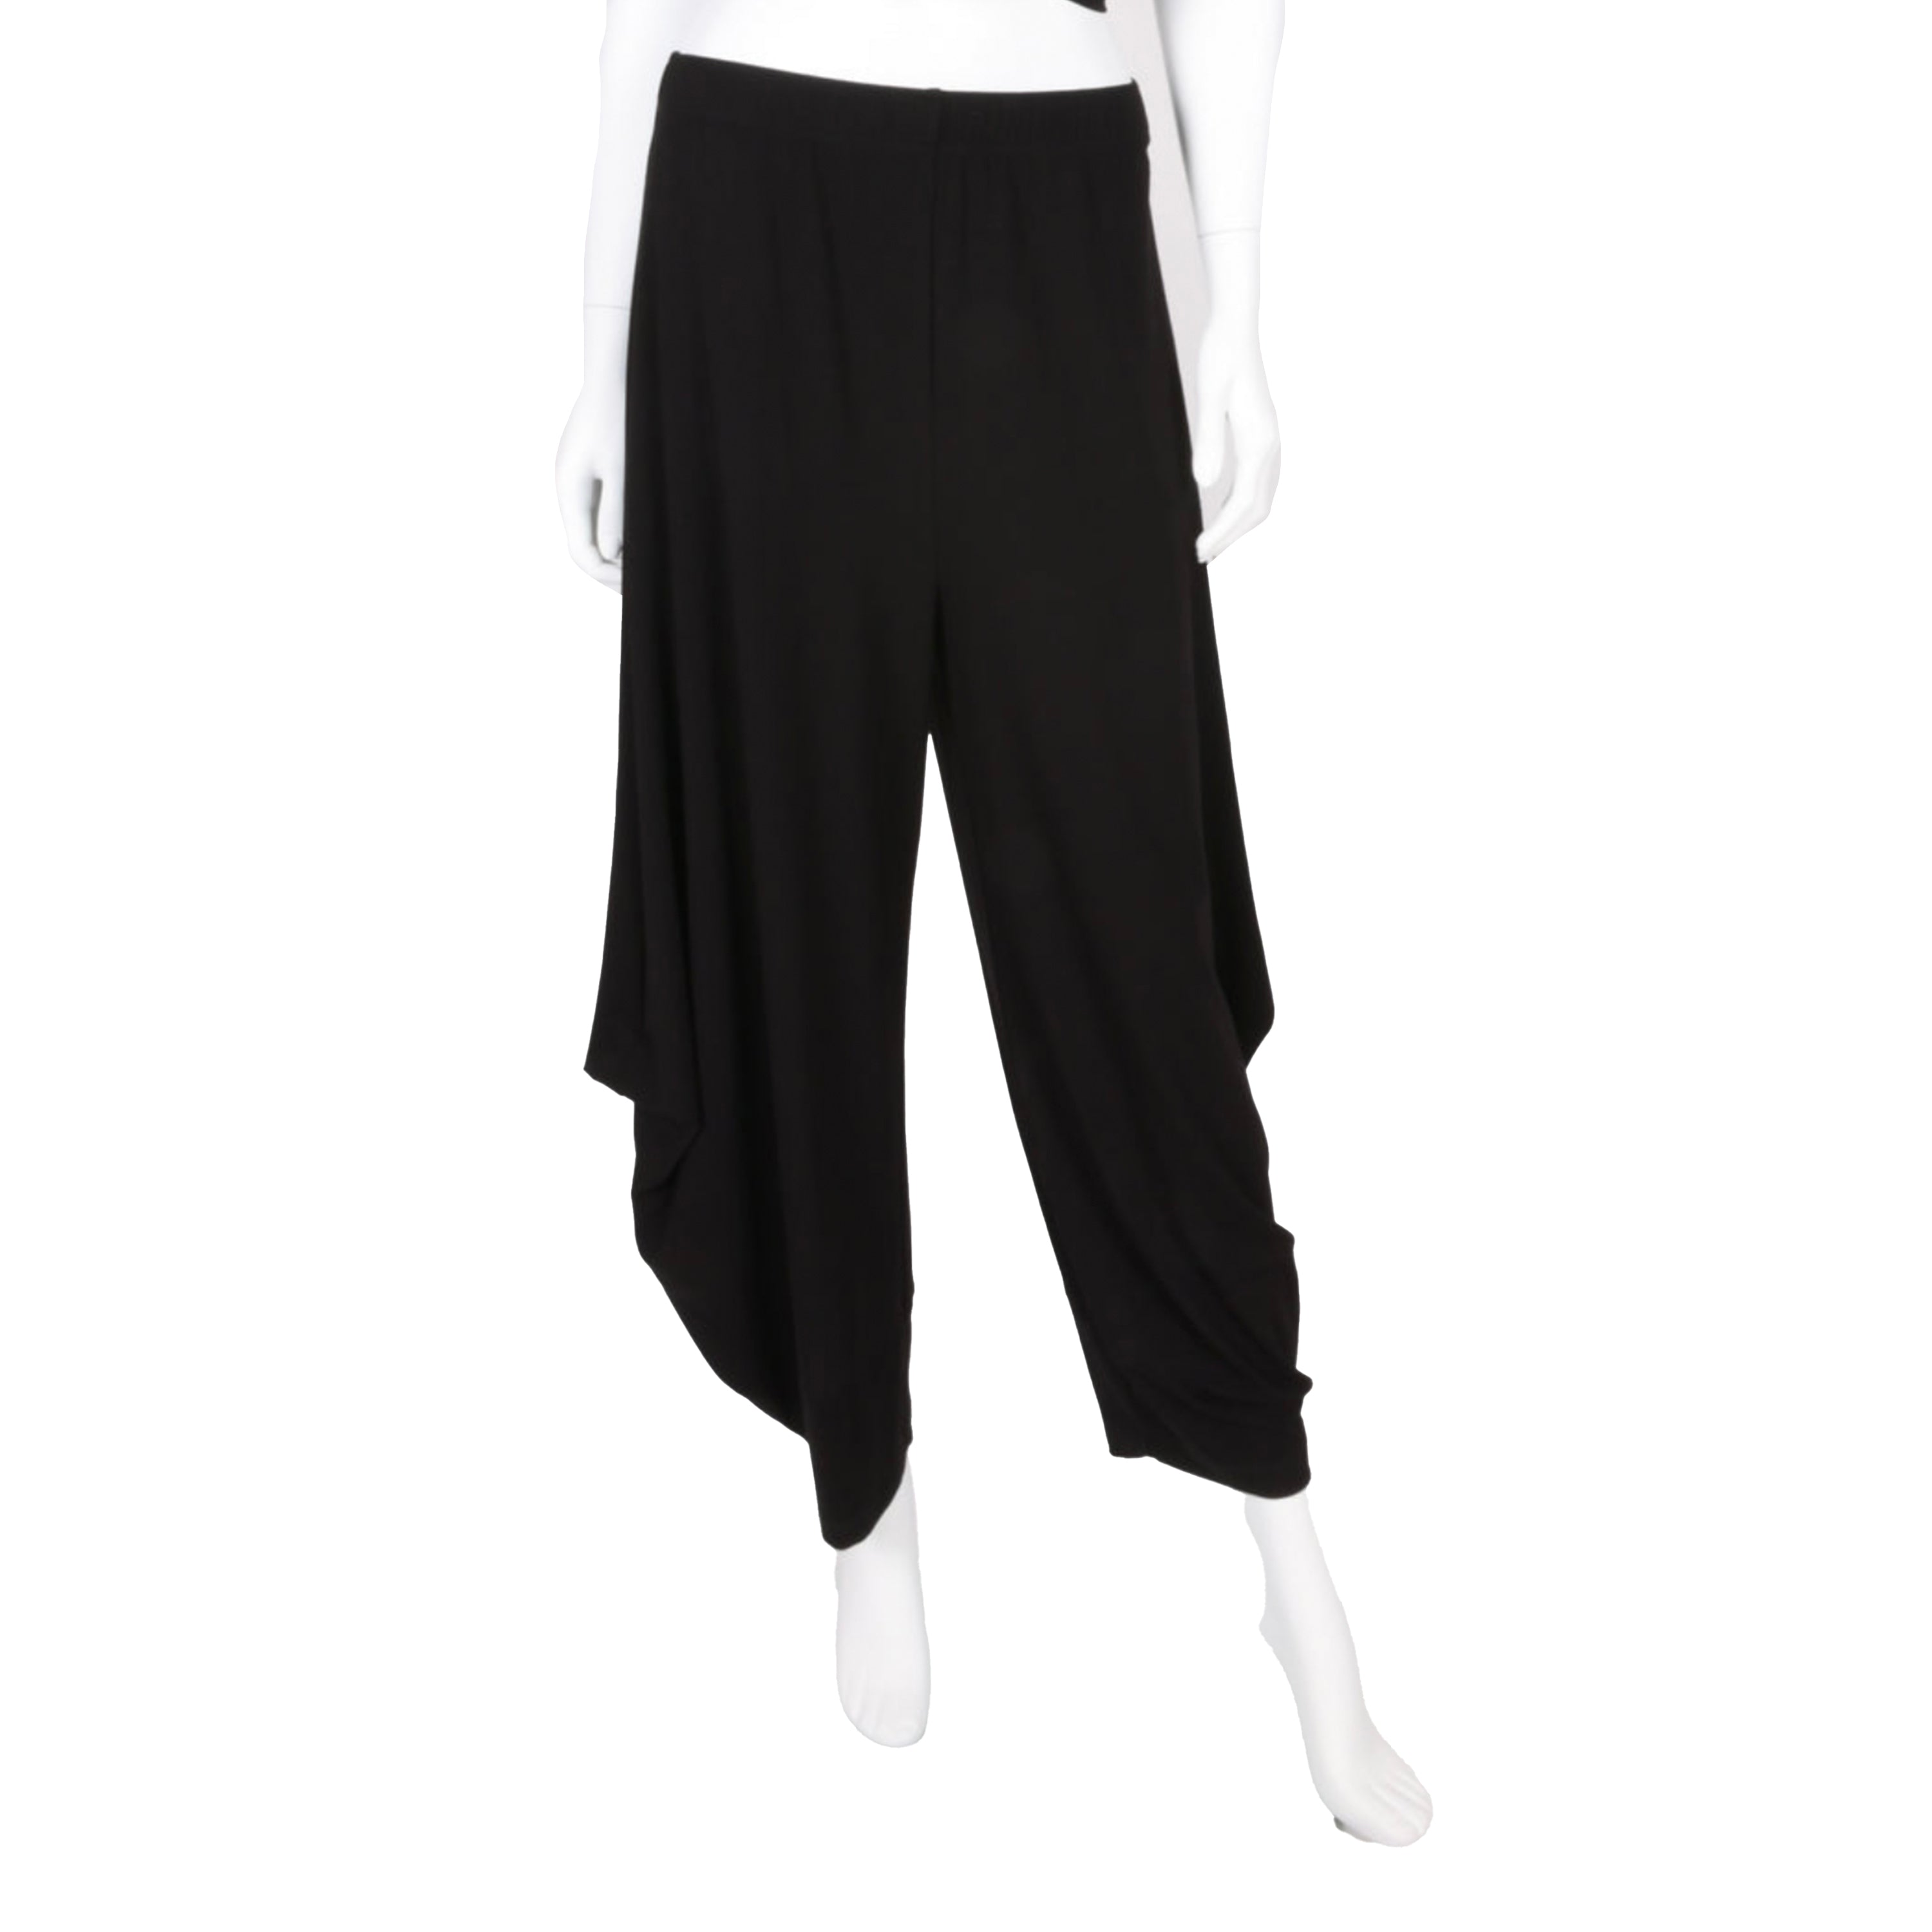 IC Collection Lantern Pant in Black - 4252P - Sizes M & L Only